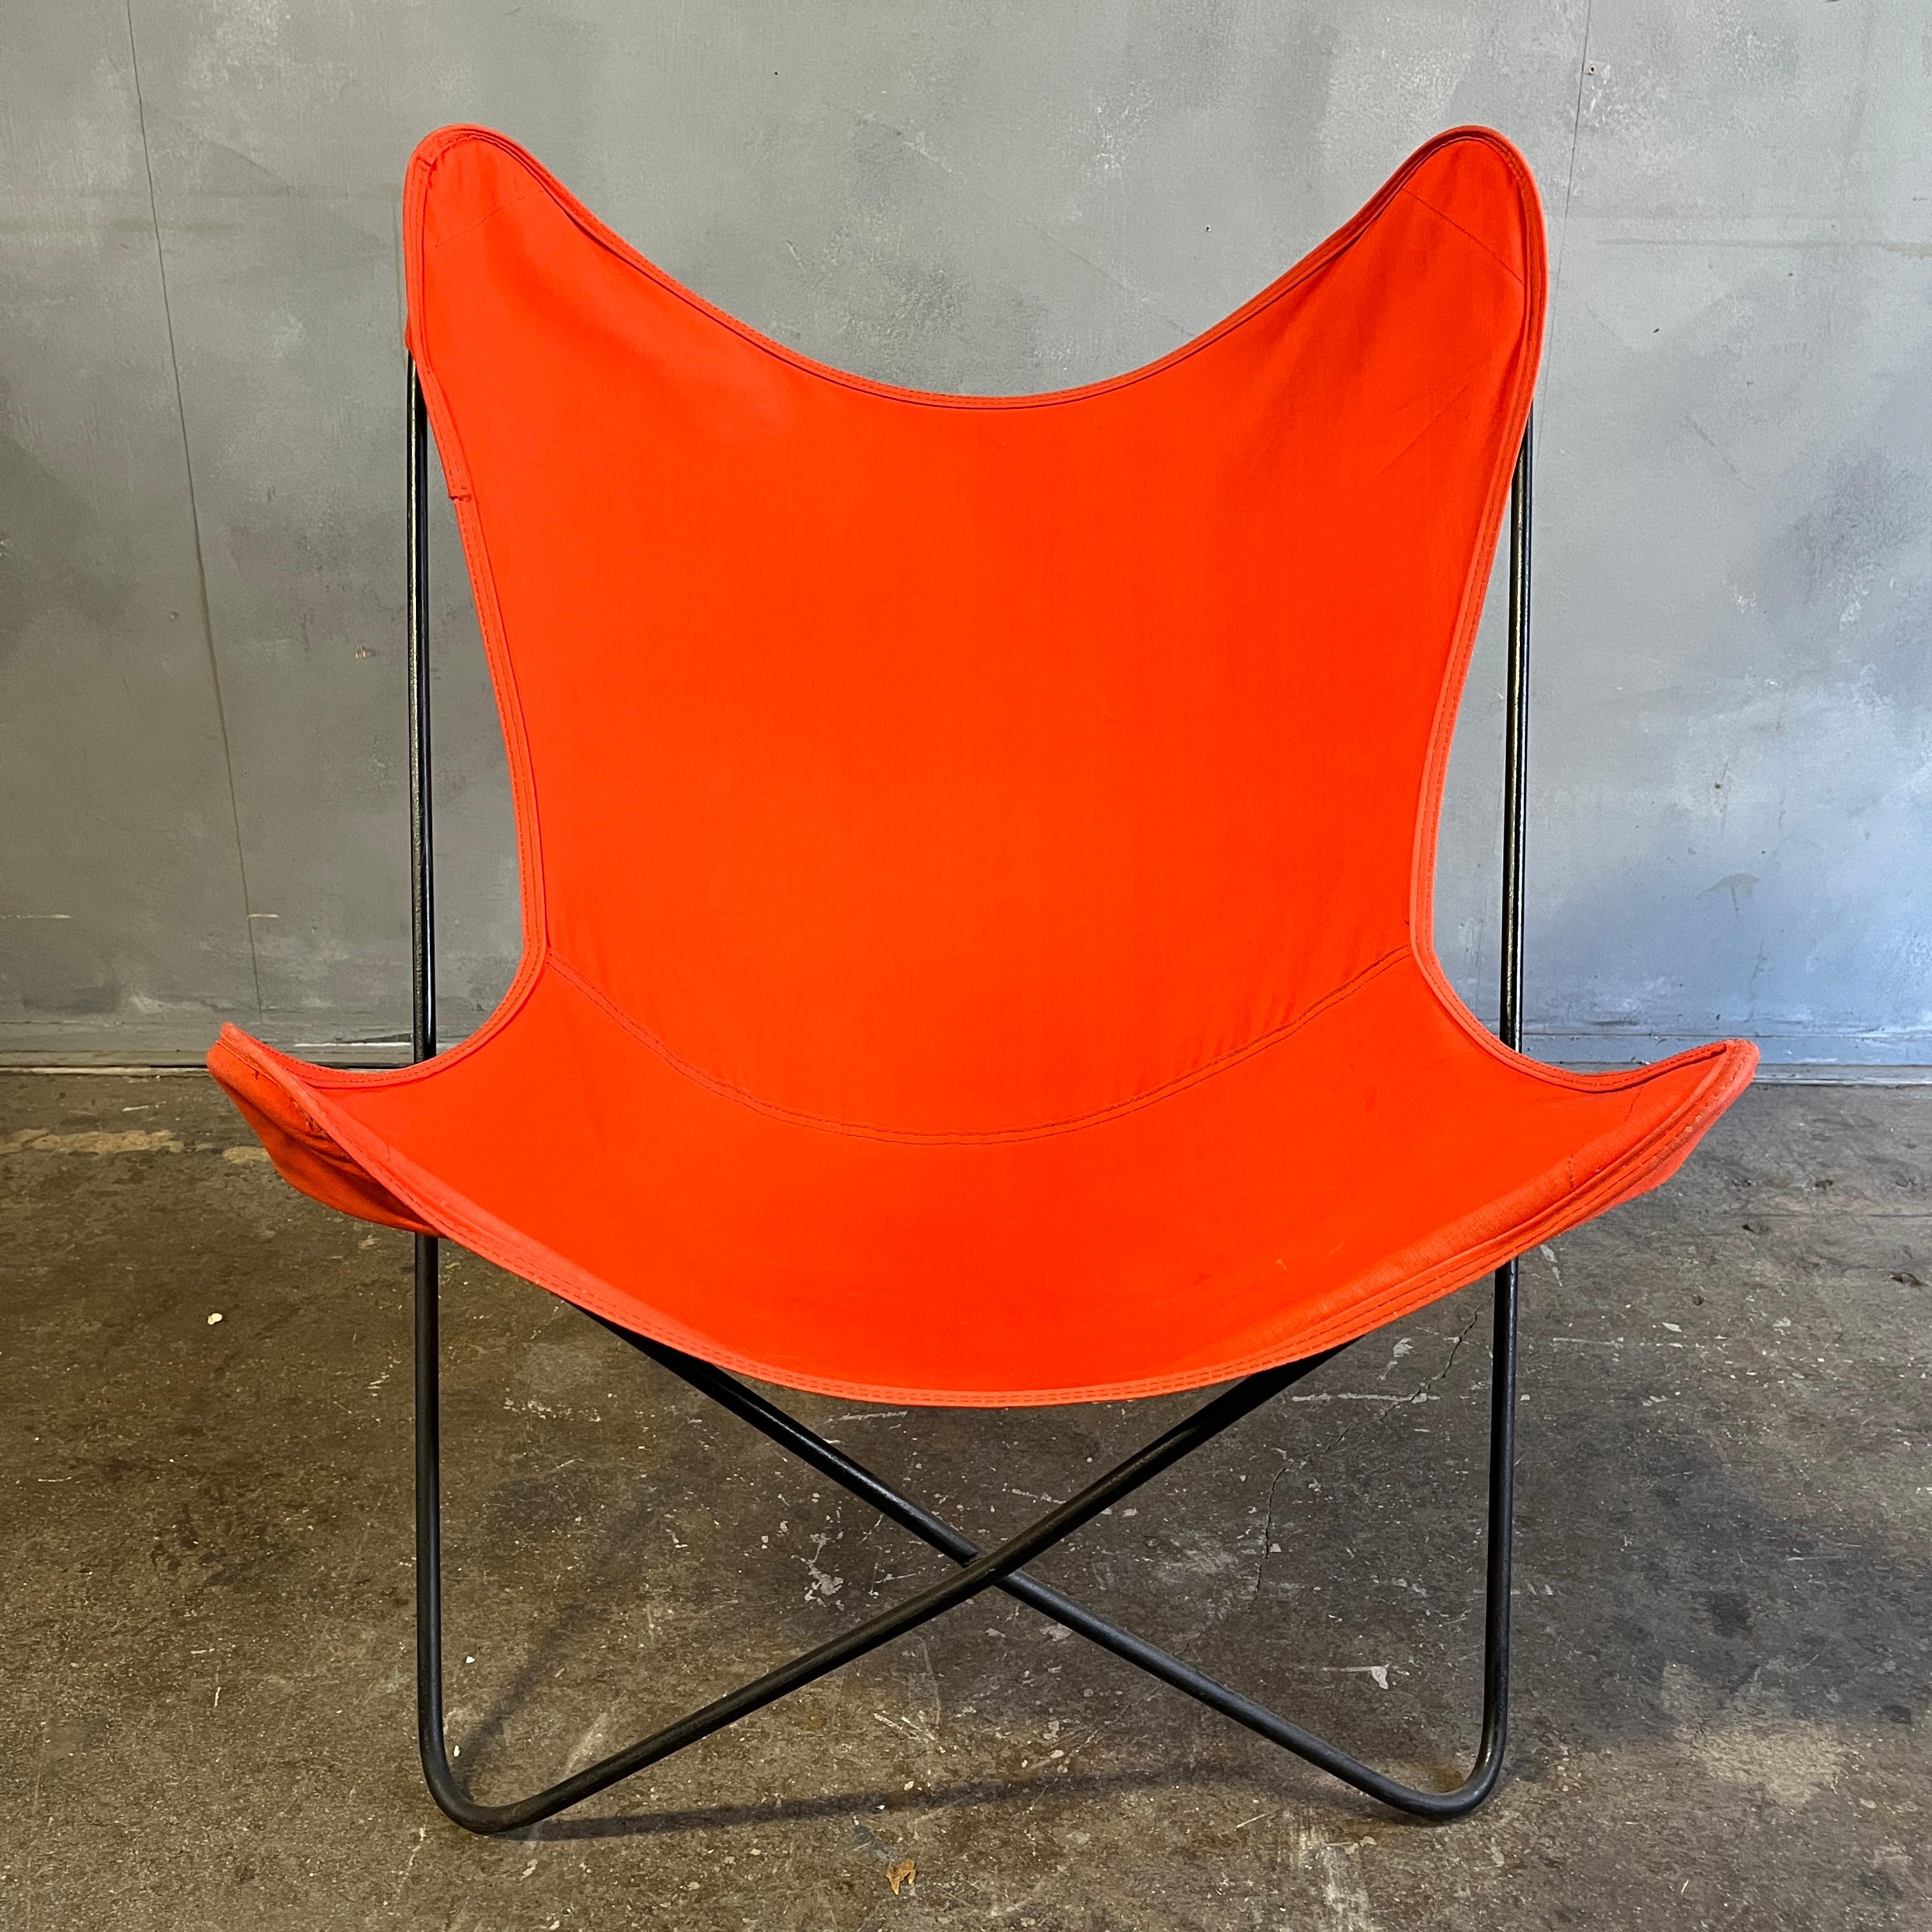 20th Century Vintage Mid-Century BKF Hardoy Butterfly Chair for Knoll